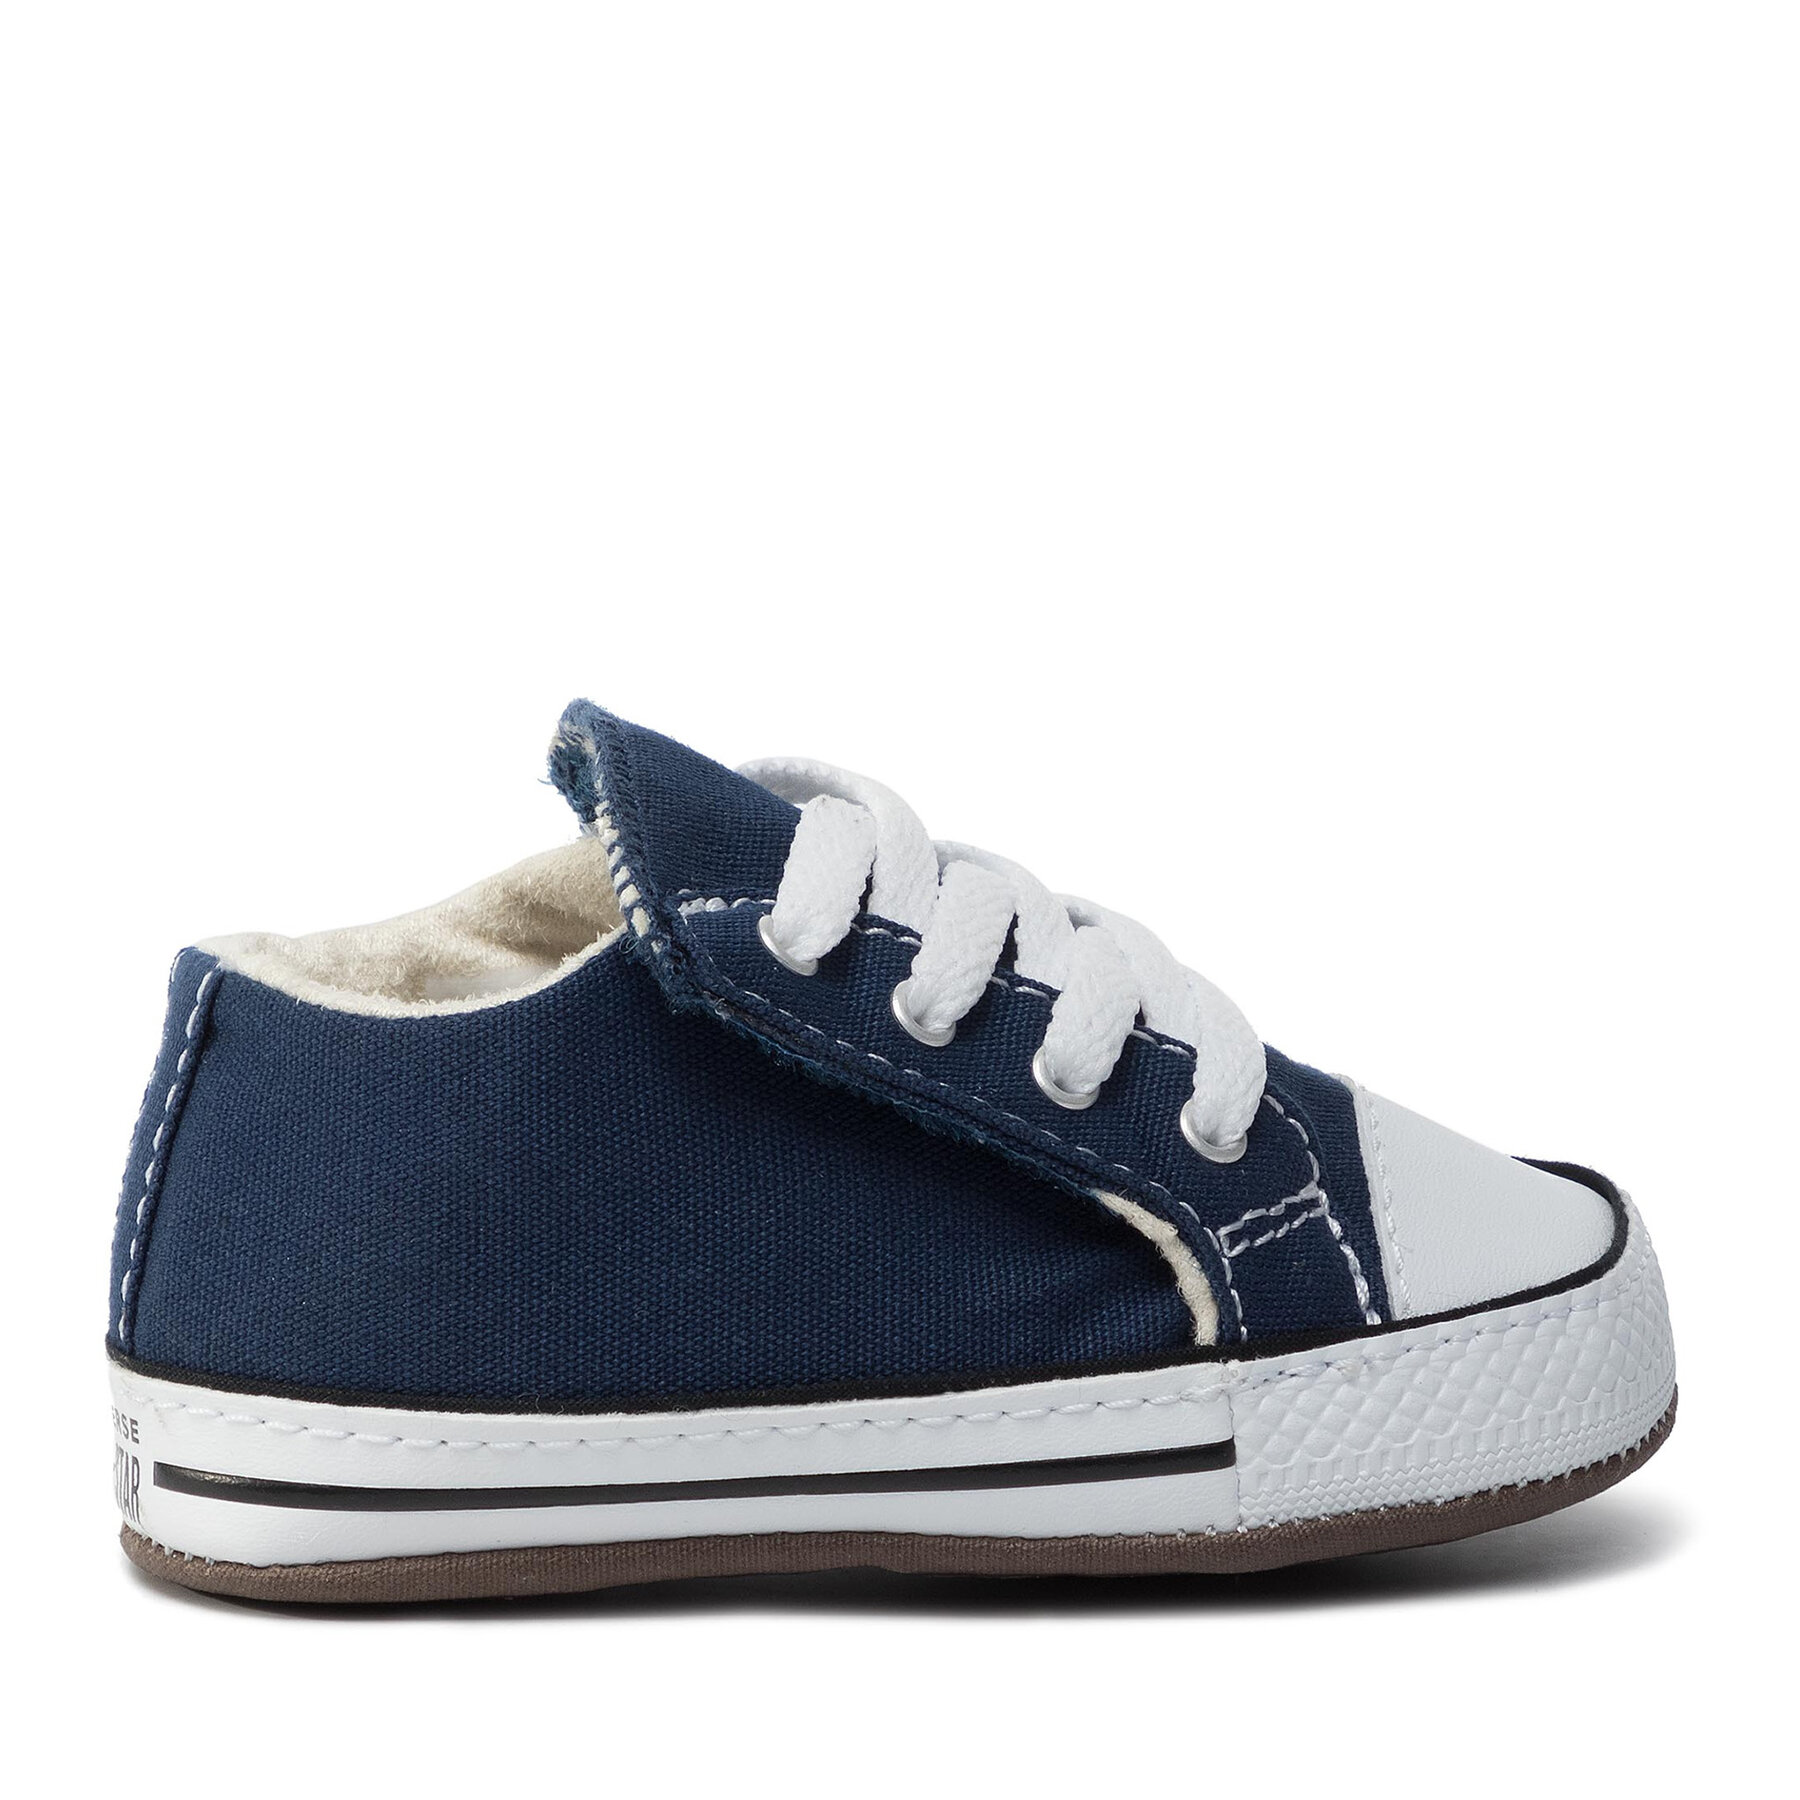 Sneakers aus Stoff Converse Ctas Cribster Mid 865158C Navy/Natural Ivory/White von Converse